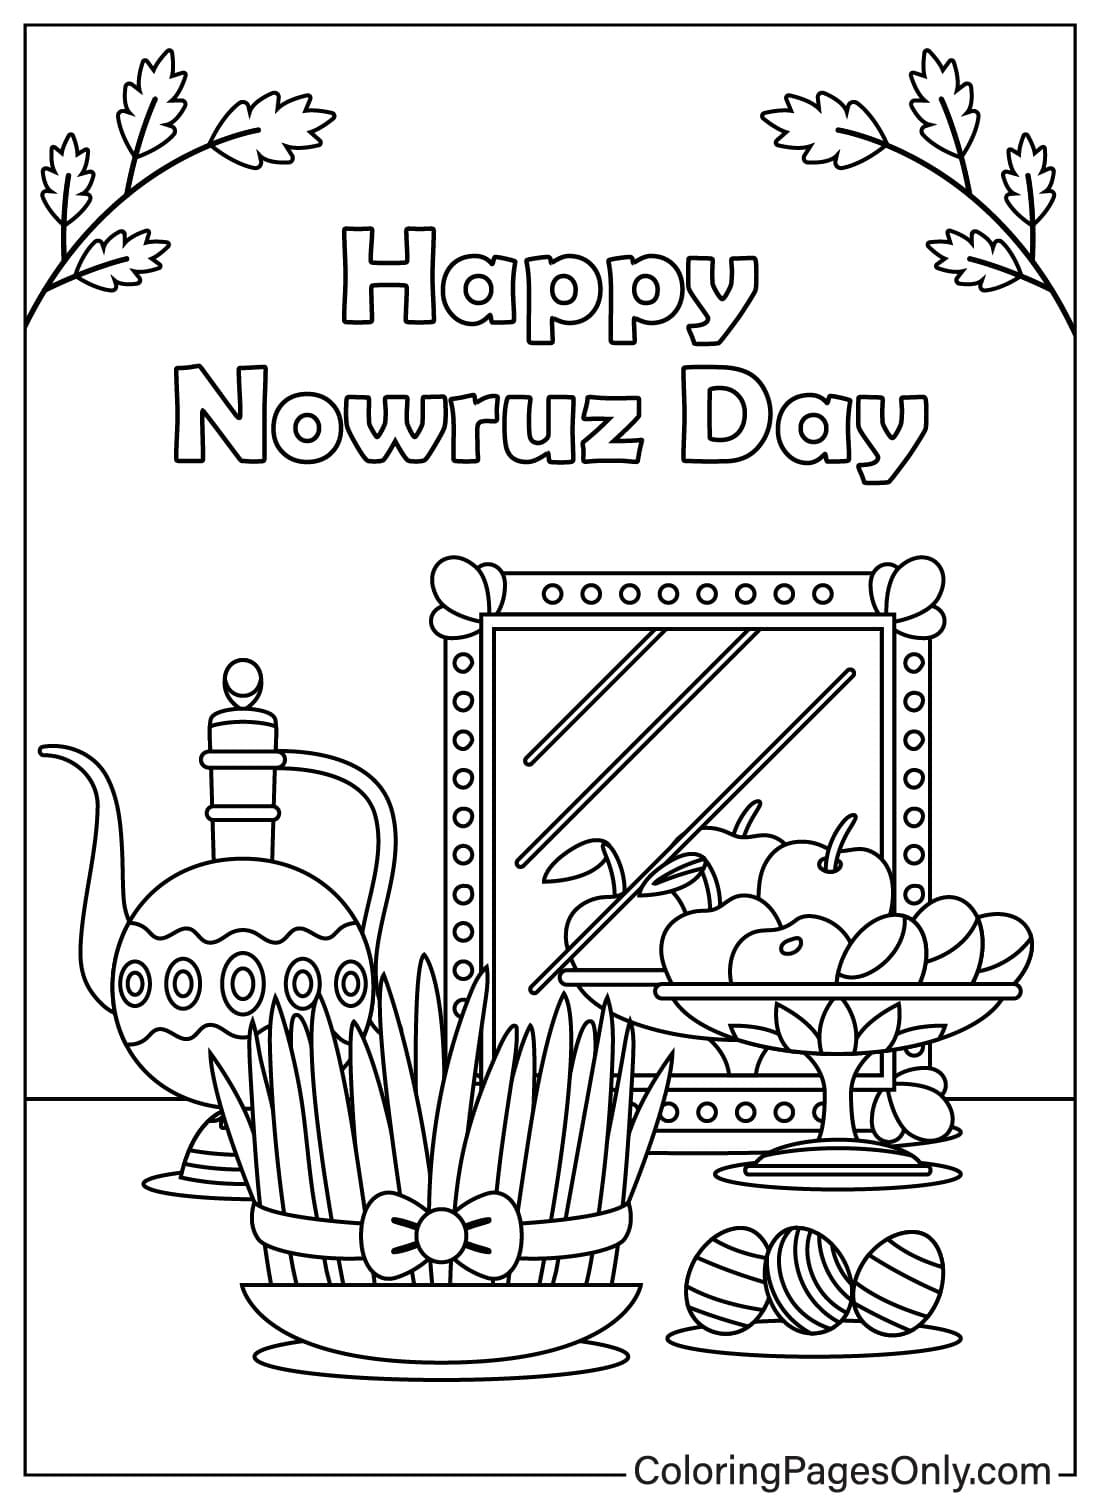 International Day of Nowruz Coloring Page from International Nowruz Day